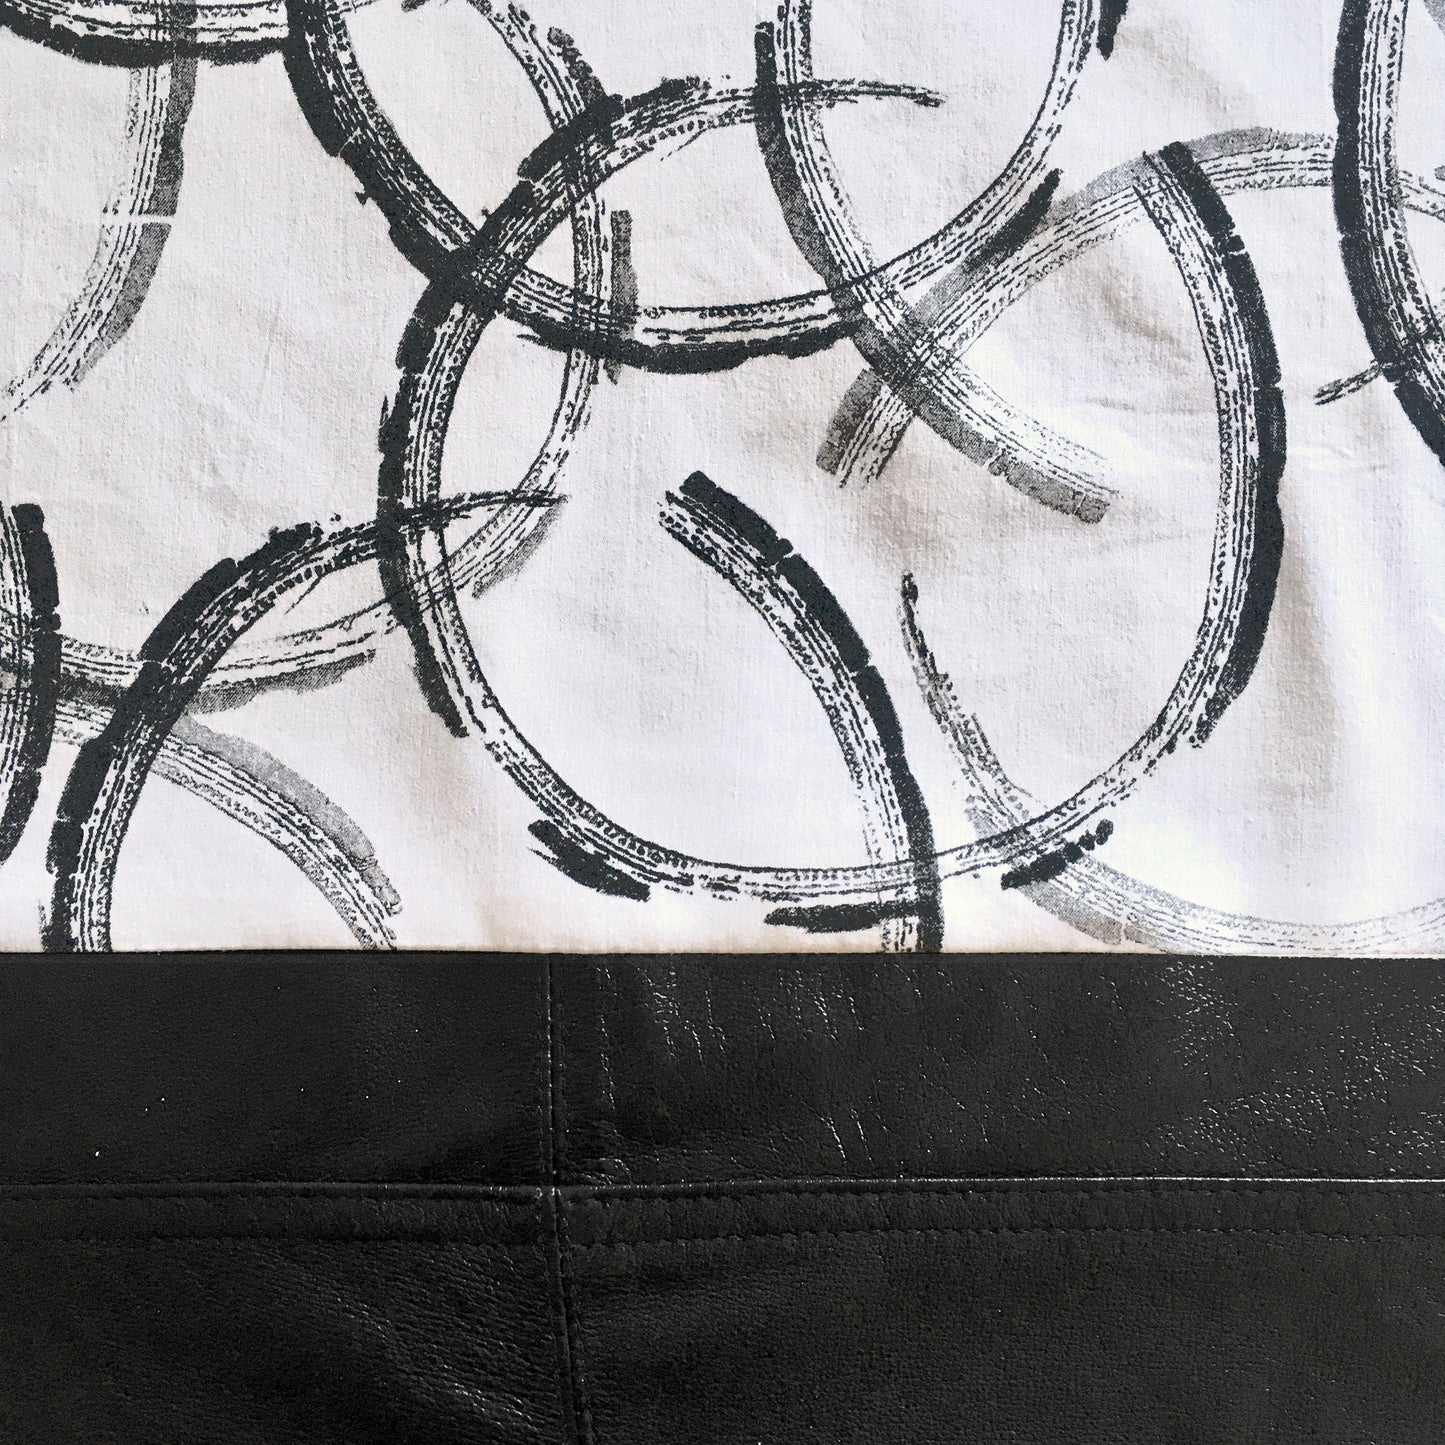 Close up detail of printed repurposed cotton and reclaimed leather tote bag, with hand printed, overlapping circles, in varying tones of black and grey.